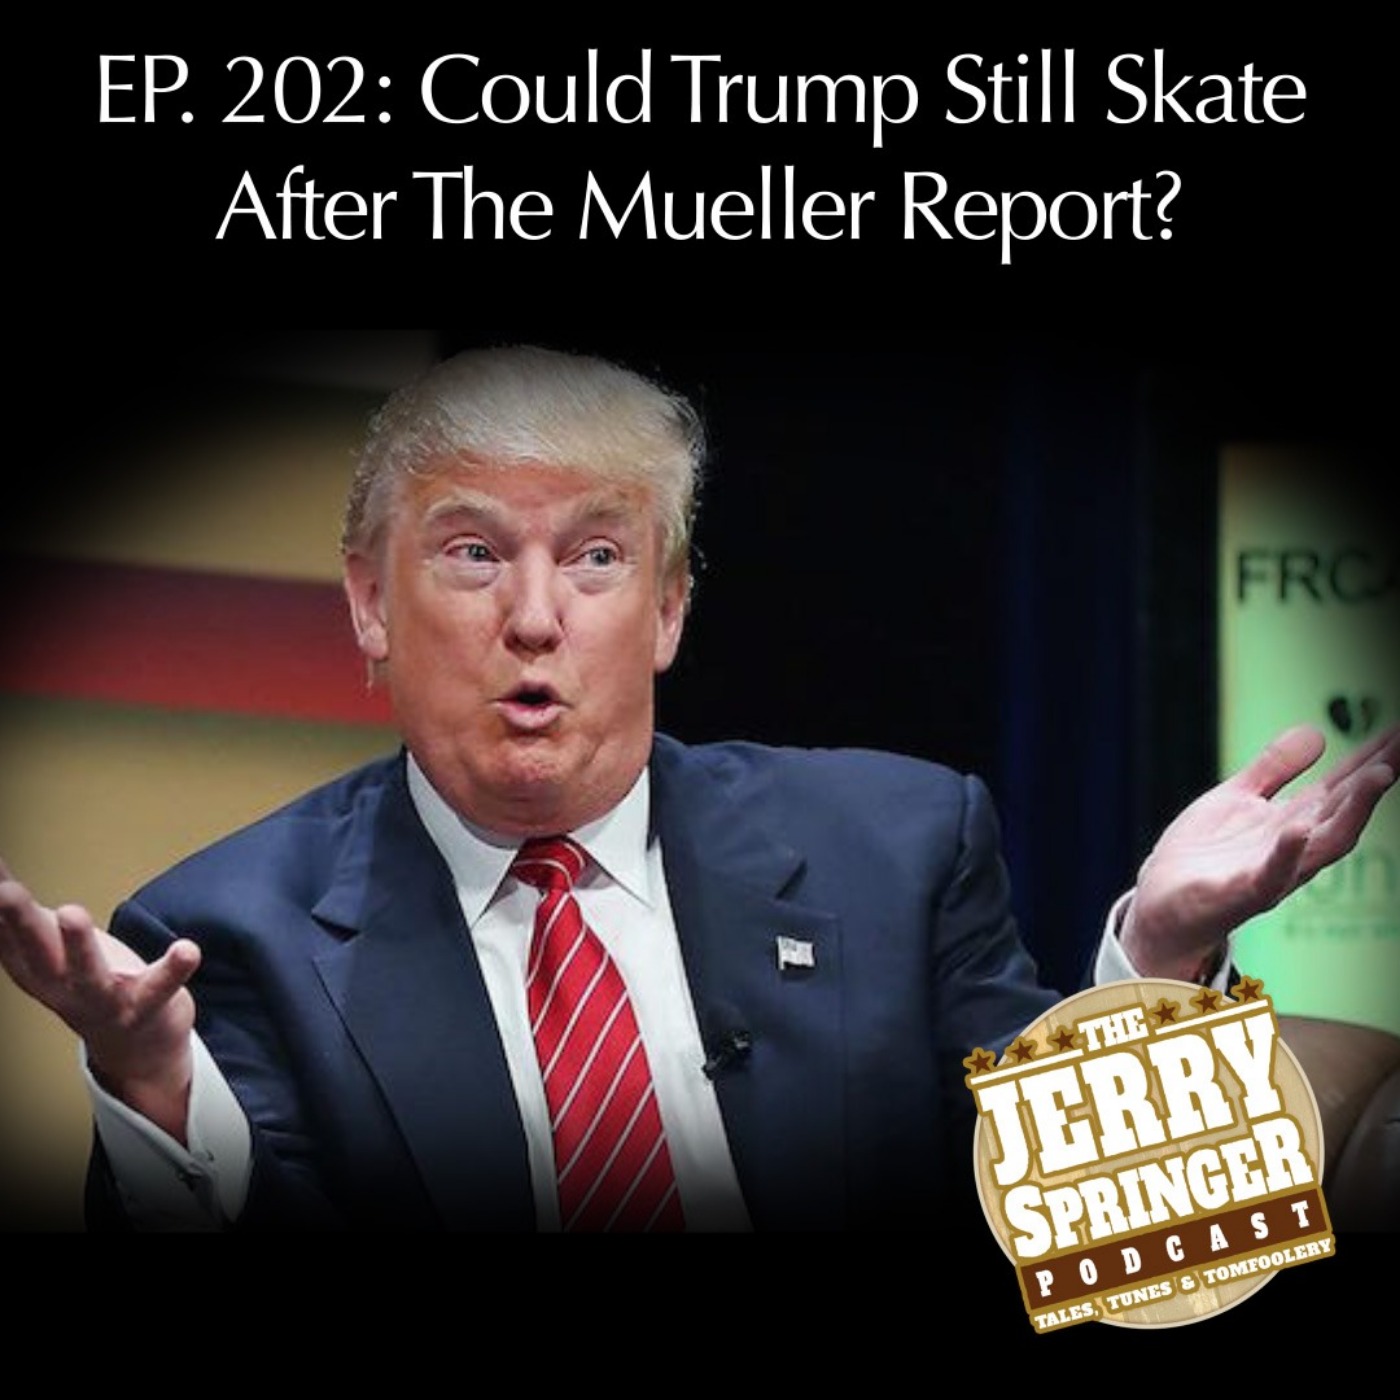 Could Trump Still Skate After The Mueller Report? - EP 202